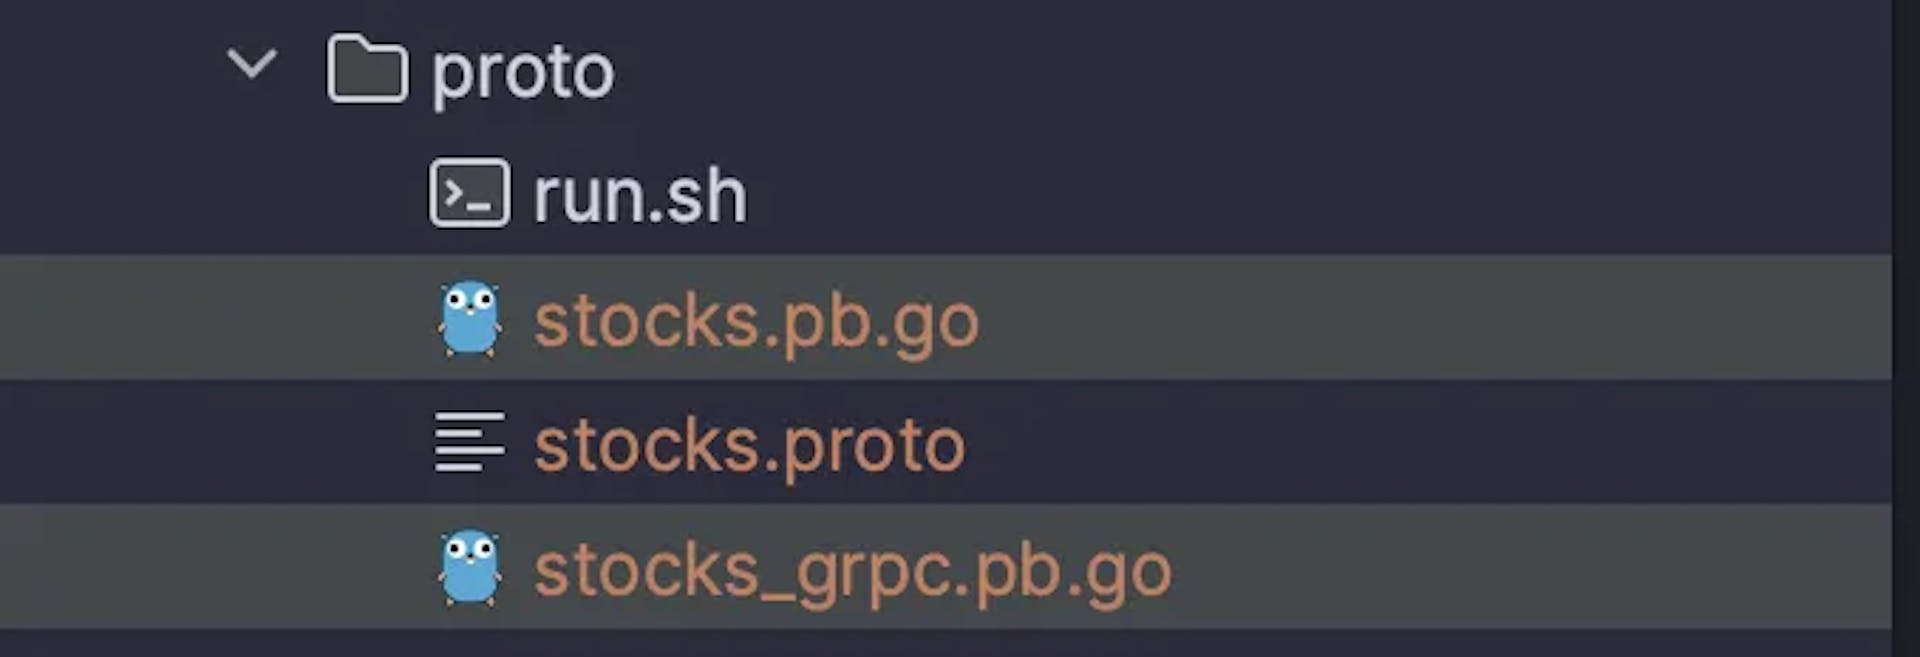 grpc files here!